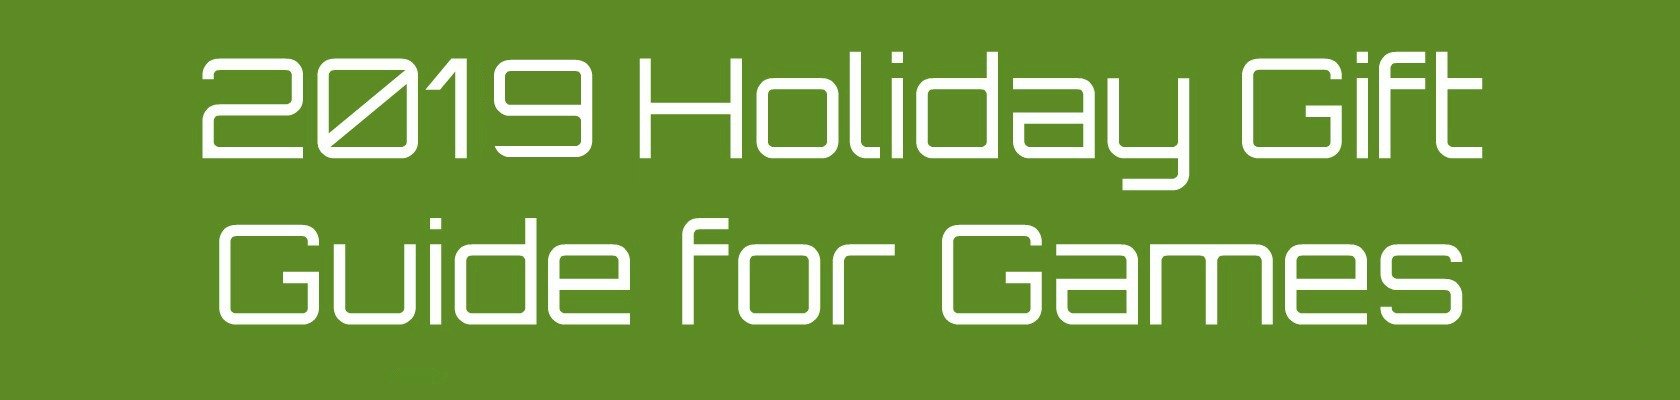 2019-Holiday-Gift-Guide-for-Gamers